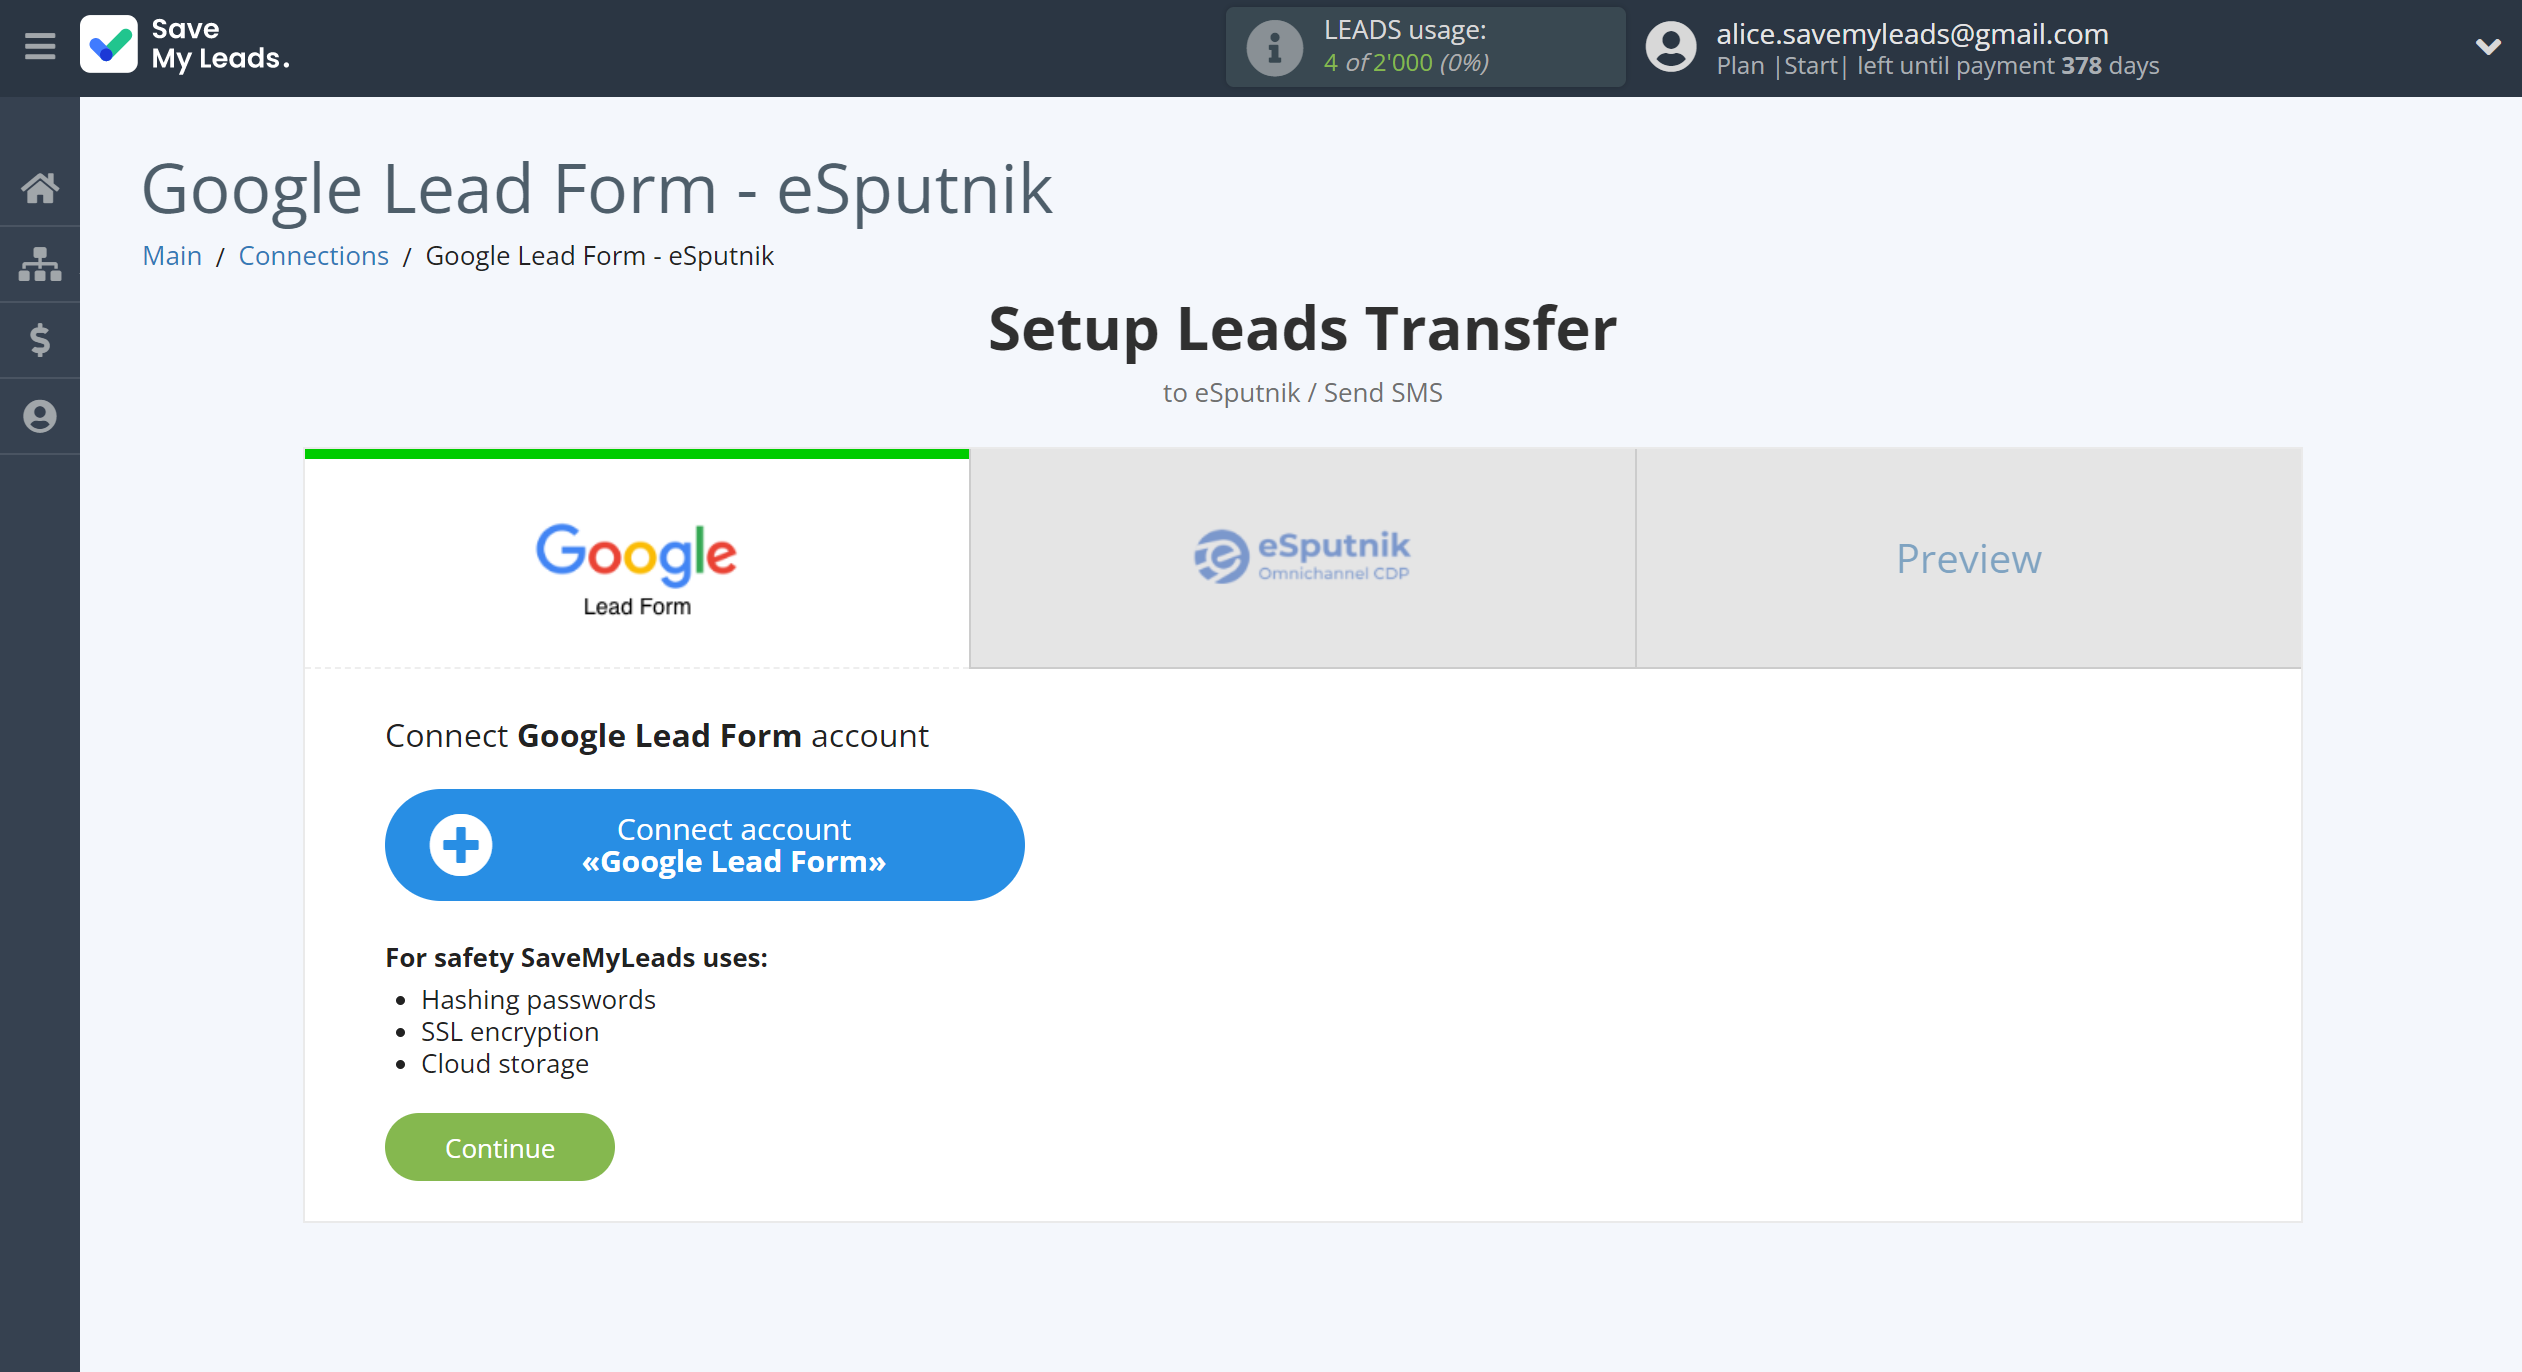 How to Connect Google Lead Form with eSputnik Send SMS | Data Source account connection